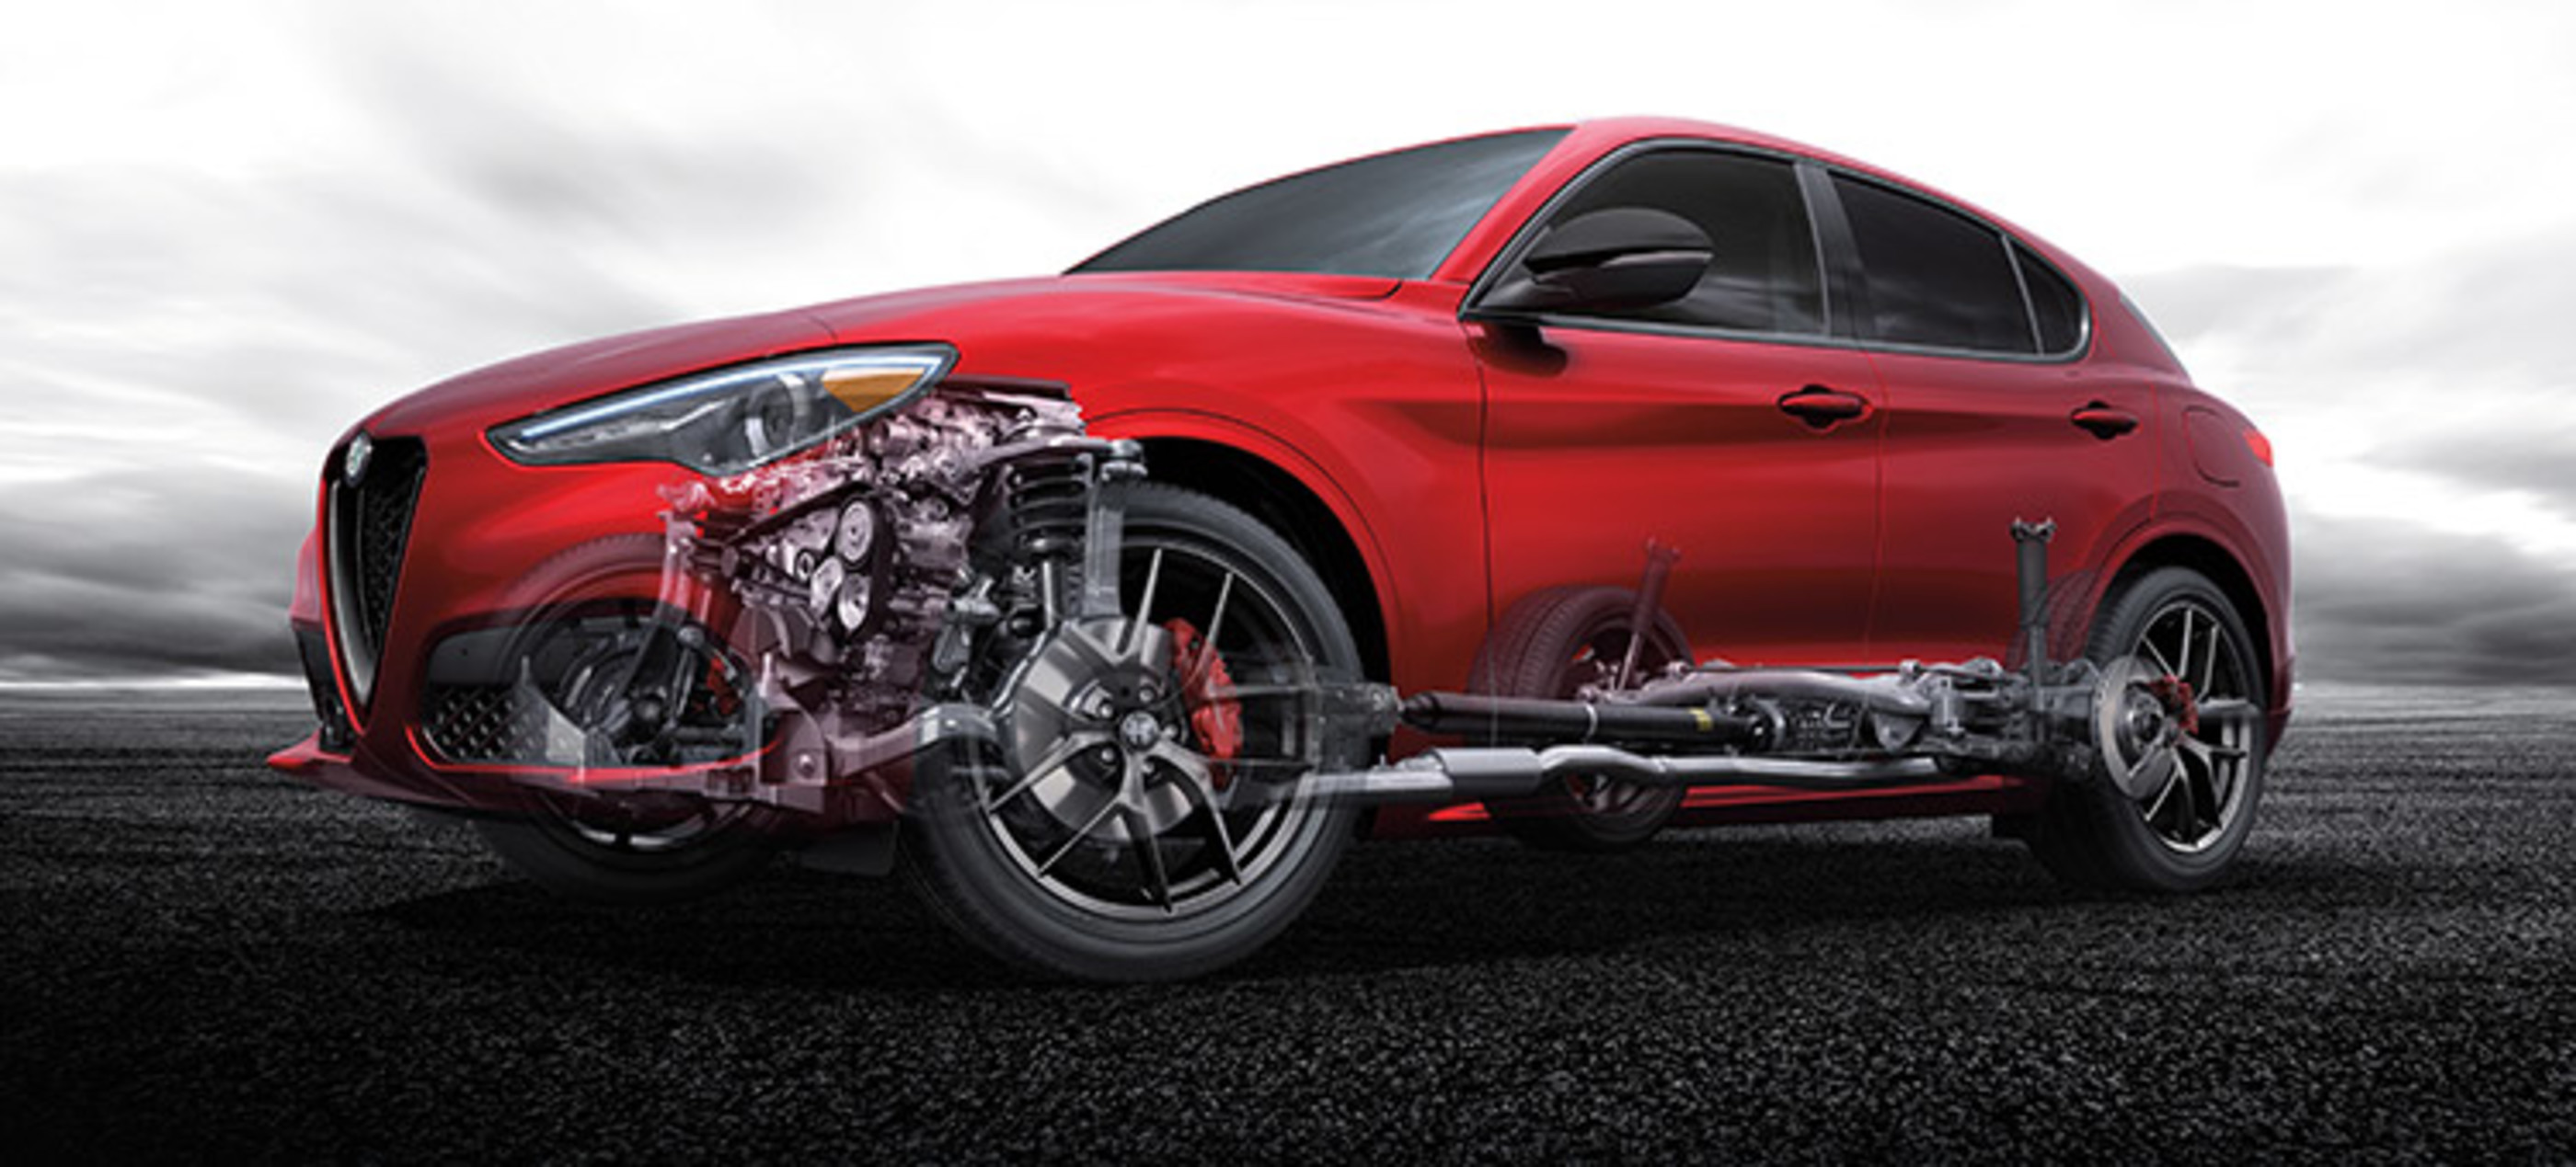 Side view of the red Alfa Romeo Stelvio, with the engine visible under the hood